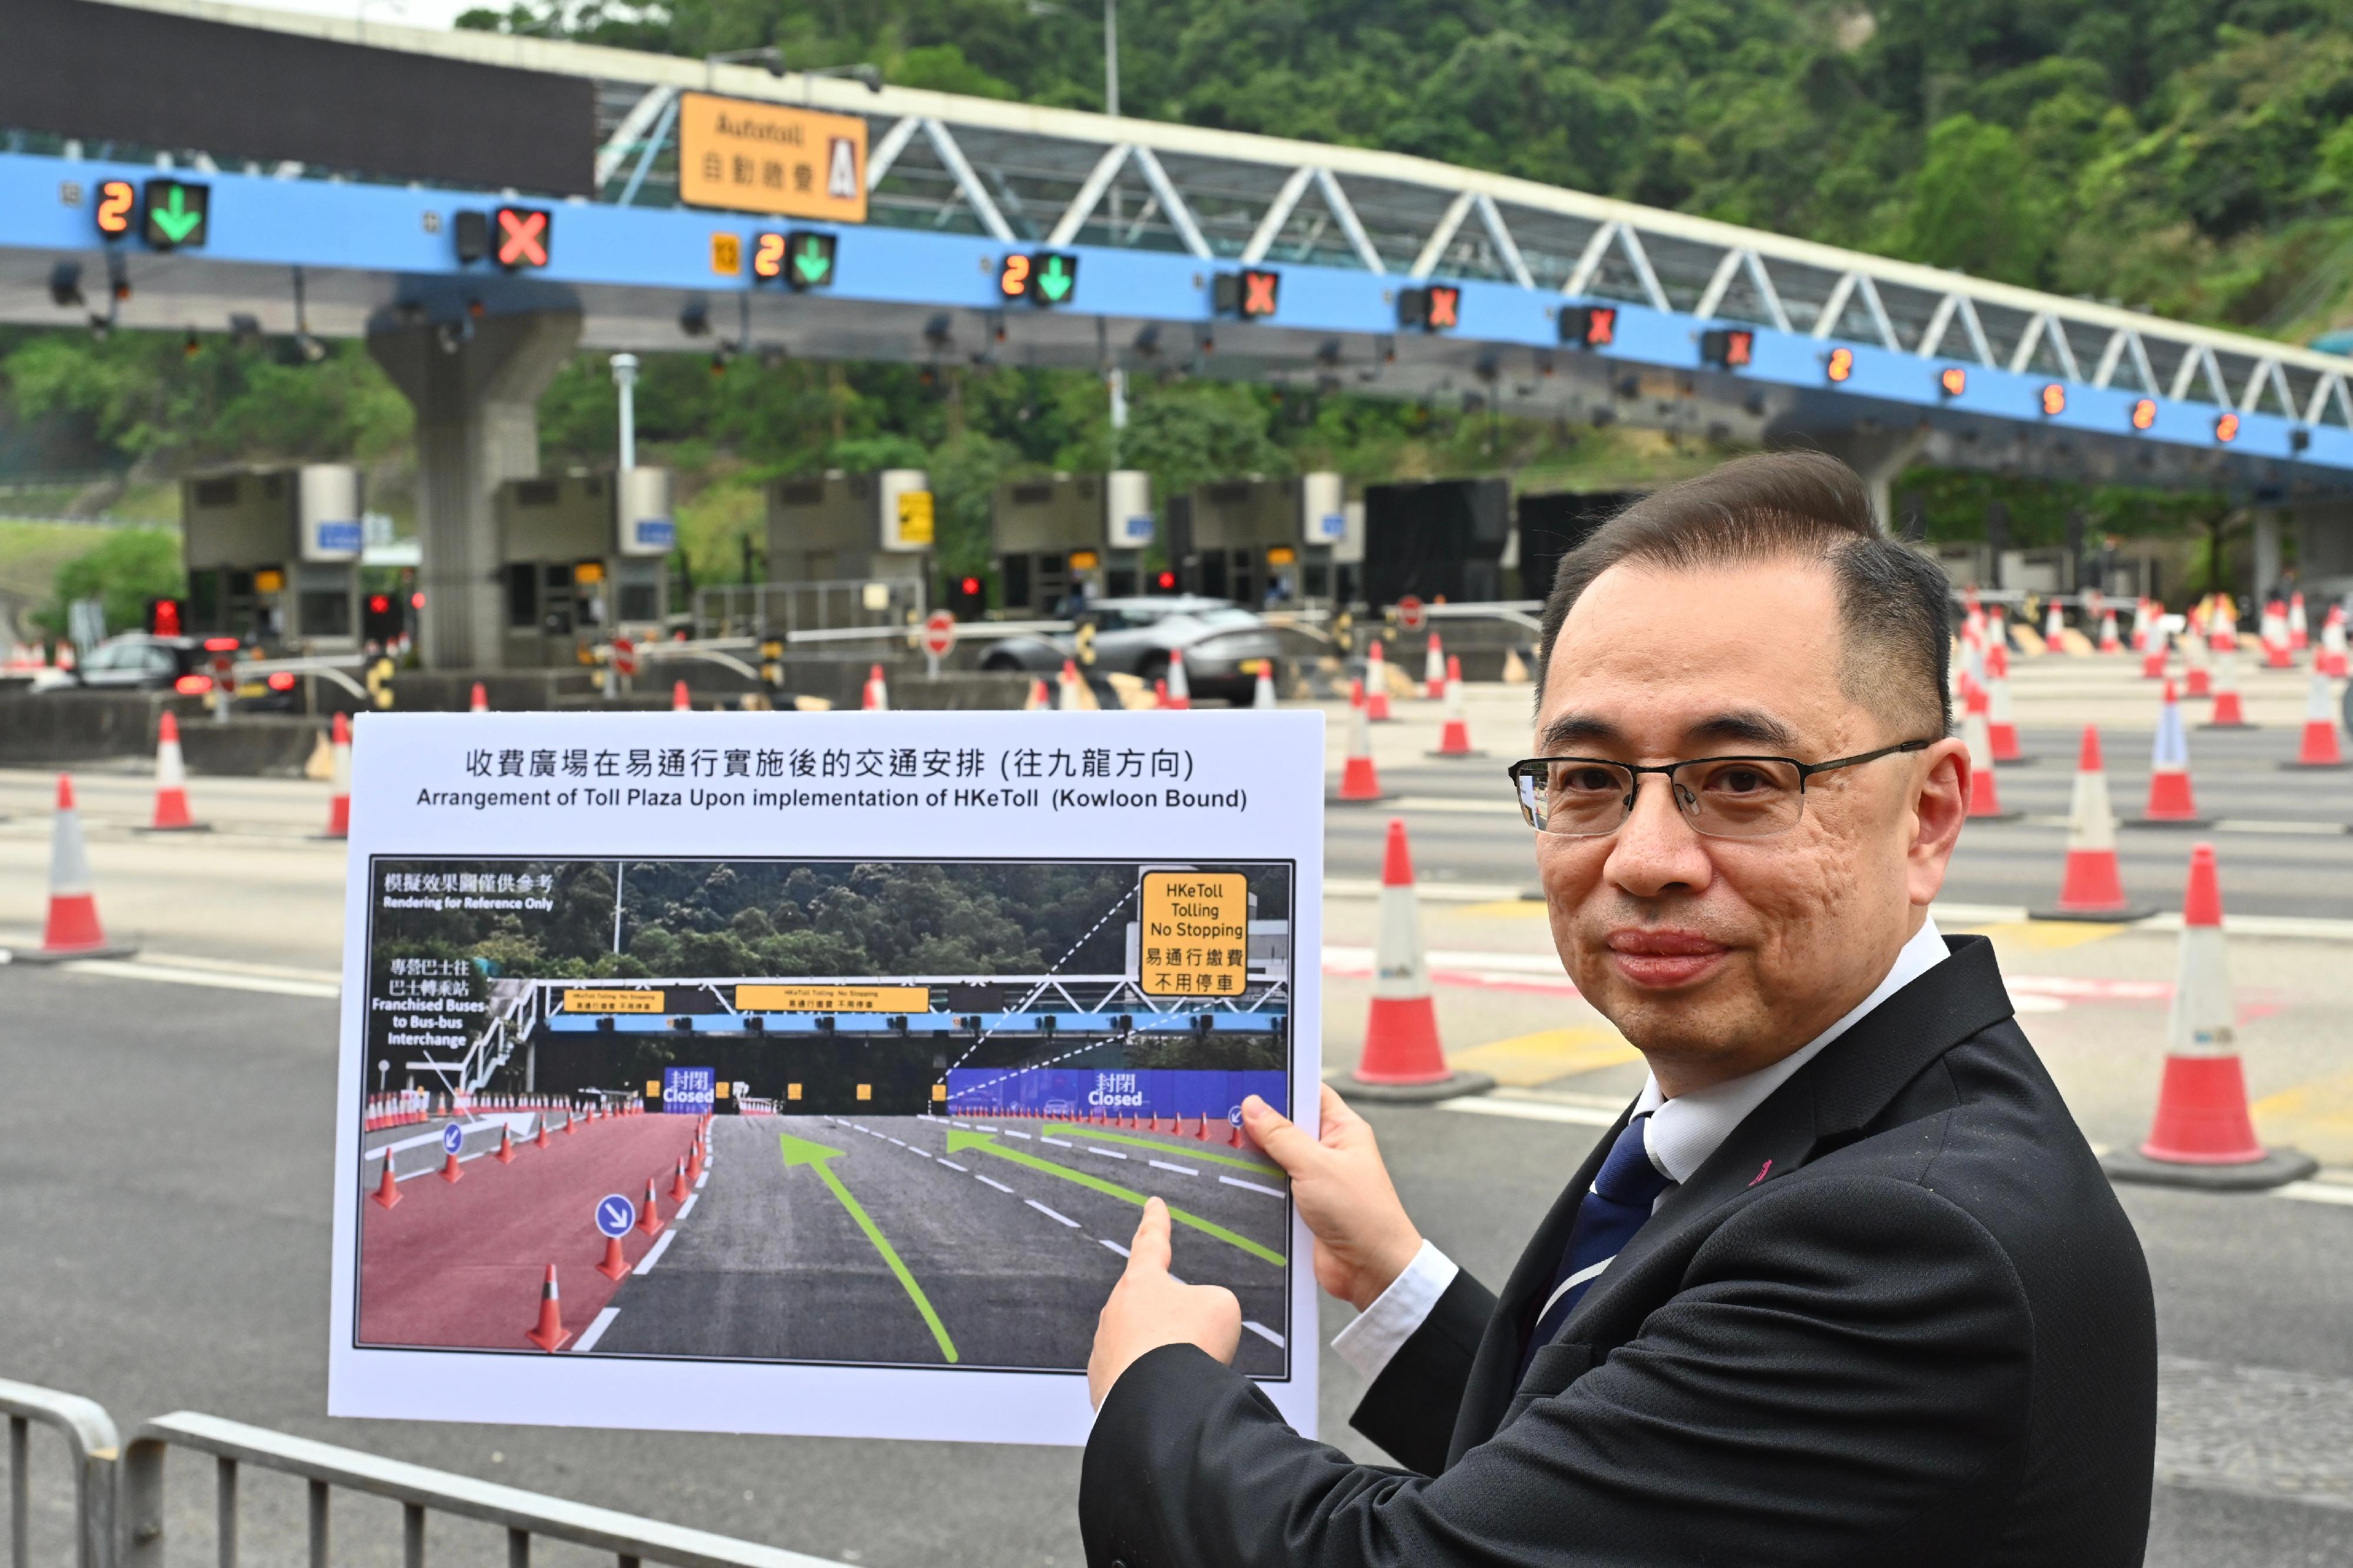 The Transport Department's Chief Traffic Engineer (New Territories East), Mr Wong Kwok-leung, reminded motorists that temporary traffic arrangements will be implemented in phases in the vicinity of the Tsing Sha Control Area from 11pm on May 6. Both directions of Eagle's Nest Tunnel, Sha Tin Heights Tunnel and Tai Wai Tunnel, and their connecting roads, will be temporarily closed from 2am to 5am on May 7 to facilitate the works to close the toll booth facilities, amend traffic signs and road markings, etc to tie in with the implementation of the HKeToll. Motorists are advised to allow sufficient journey times and use alternative routes, such as Tai Po Road and Lion Rock Tunnel, to travel between Kowloon and Sha Tin. Traffic signs and road markings will be provided on-site to guide the motorists.